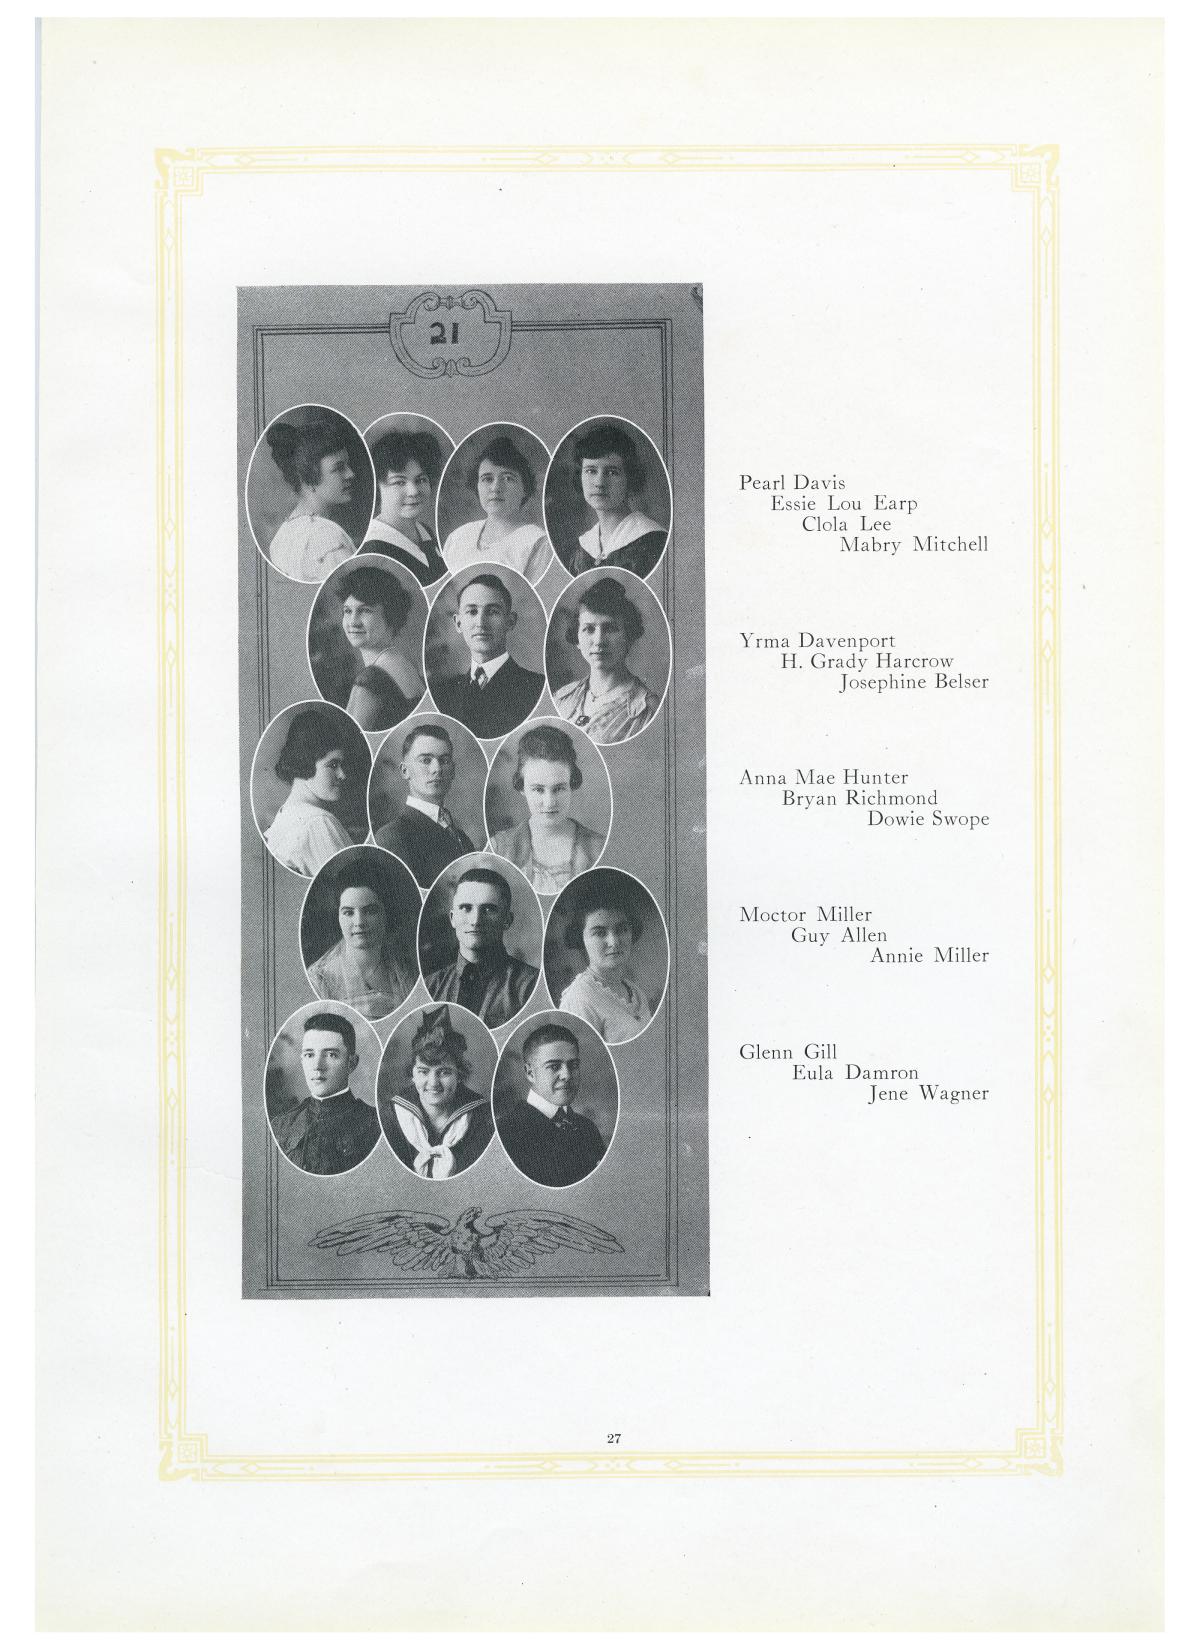 The Lasso, Yearbook of Howard Payne College, 1919
                                                
                                                    27
                                                